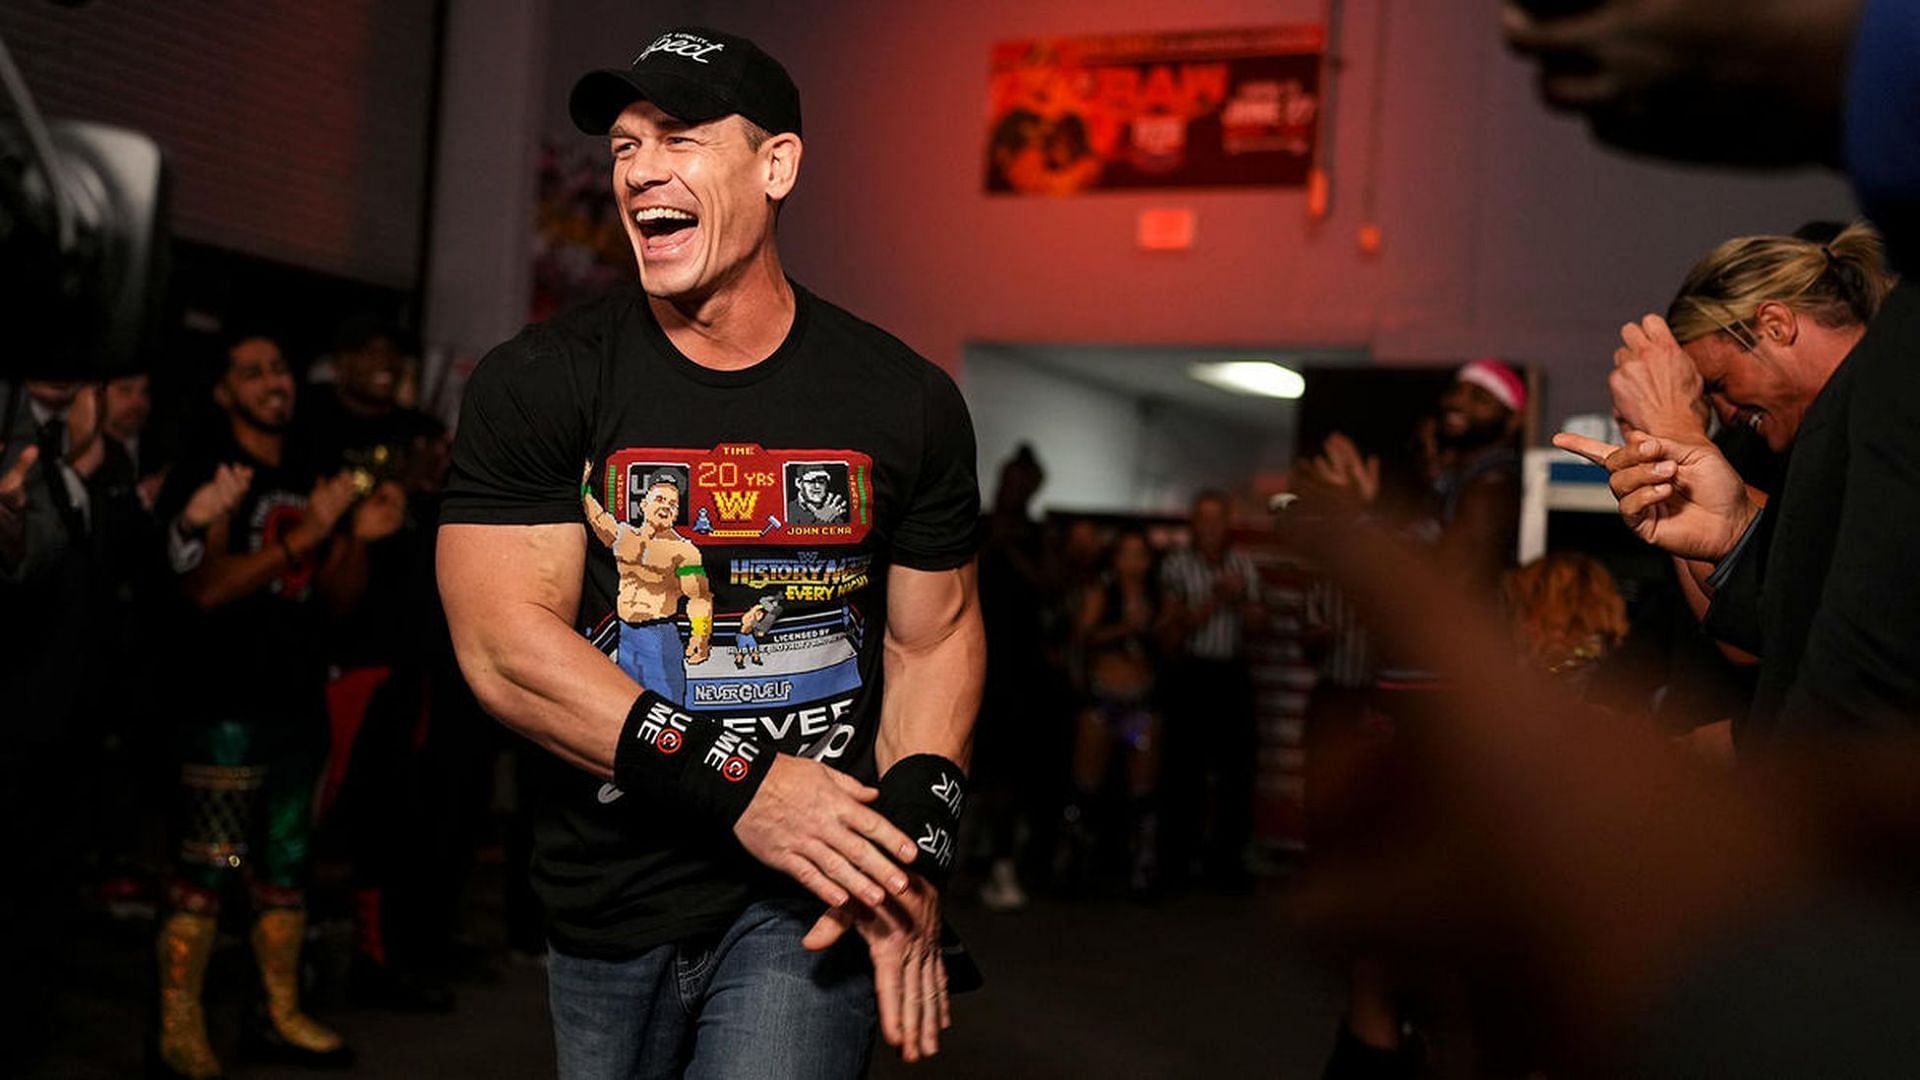 John Cena celebrated his 20-year WWE Anniversary on Raw early in June this year.